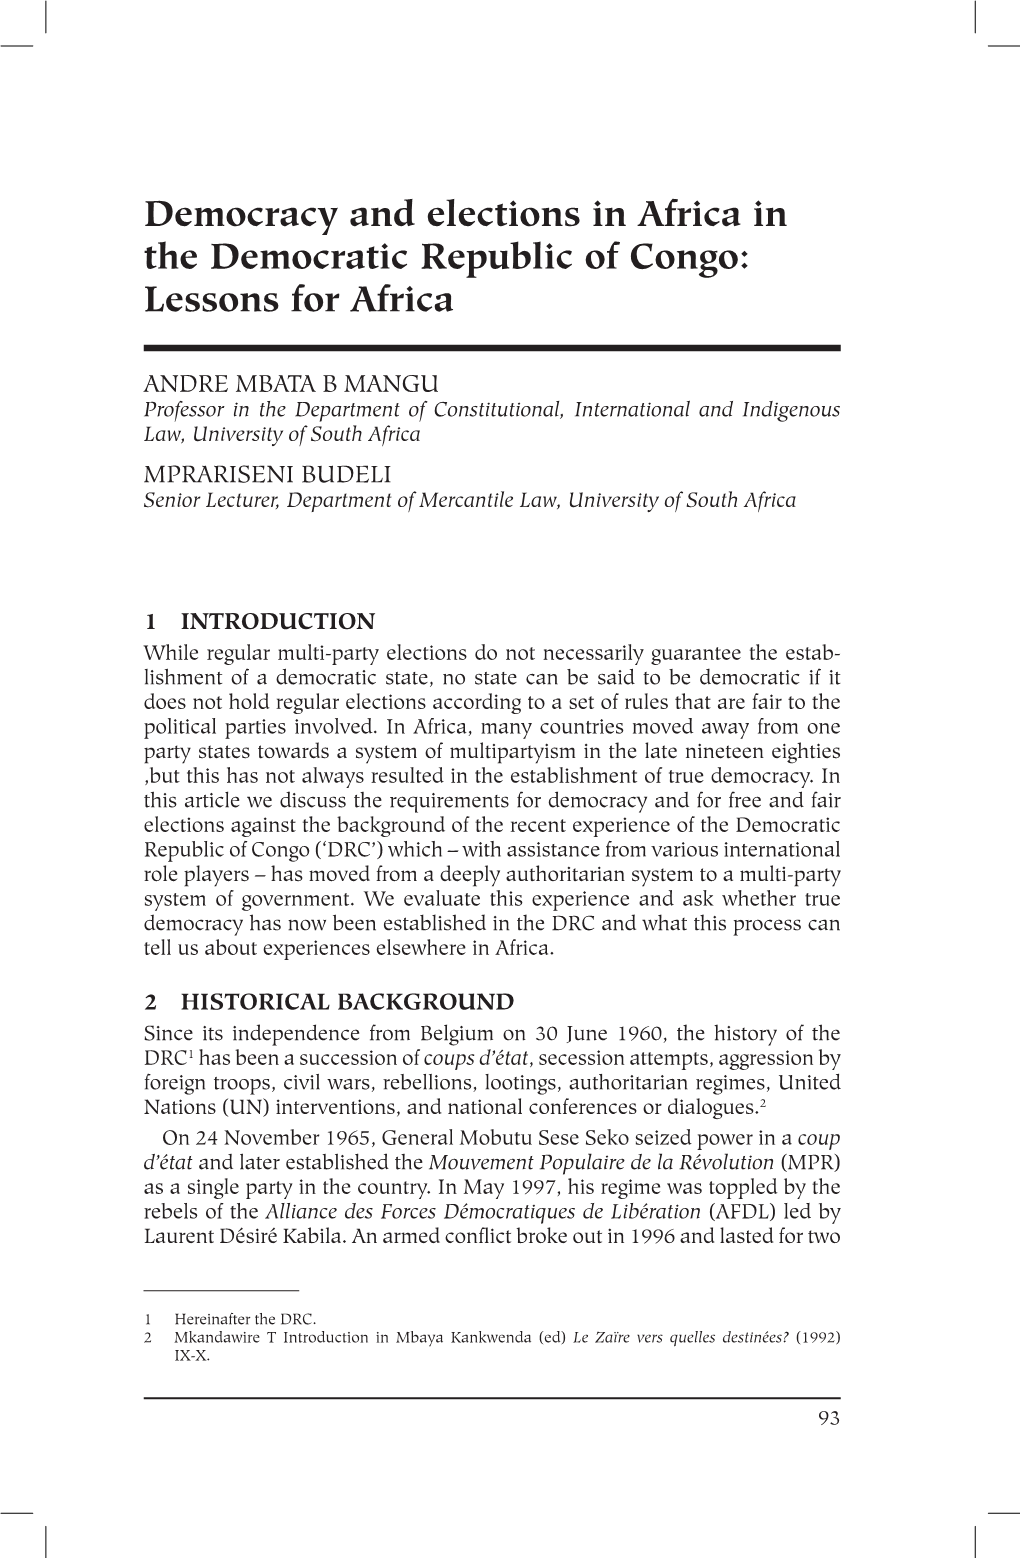 Democracy and Elections in Africa in the Democratic Republic of Congo: Lessons for Africa